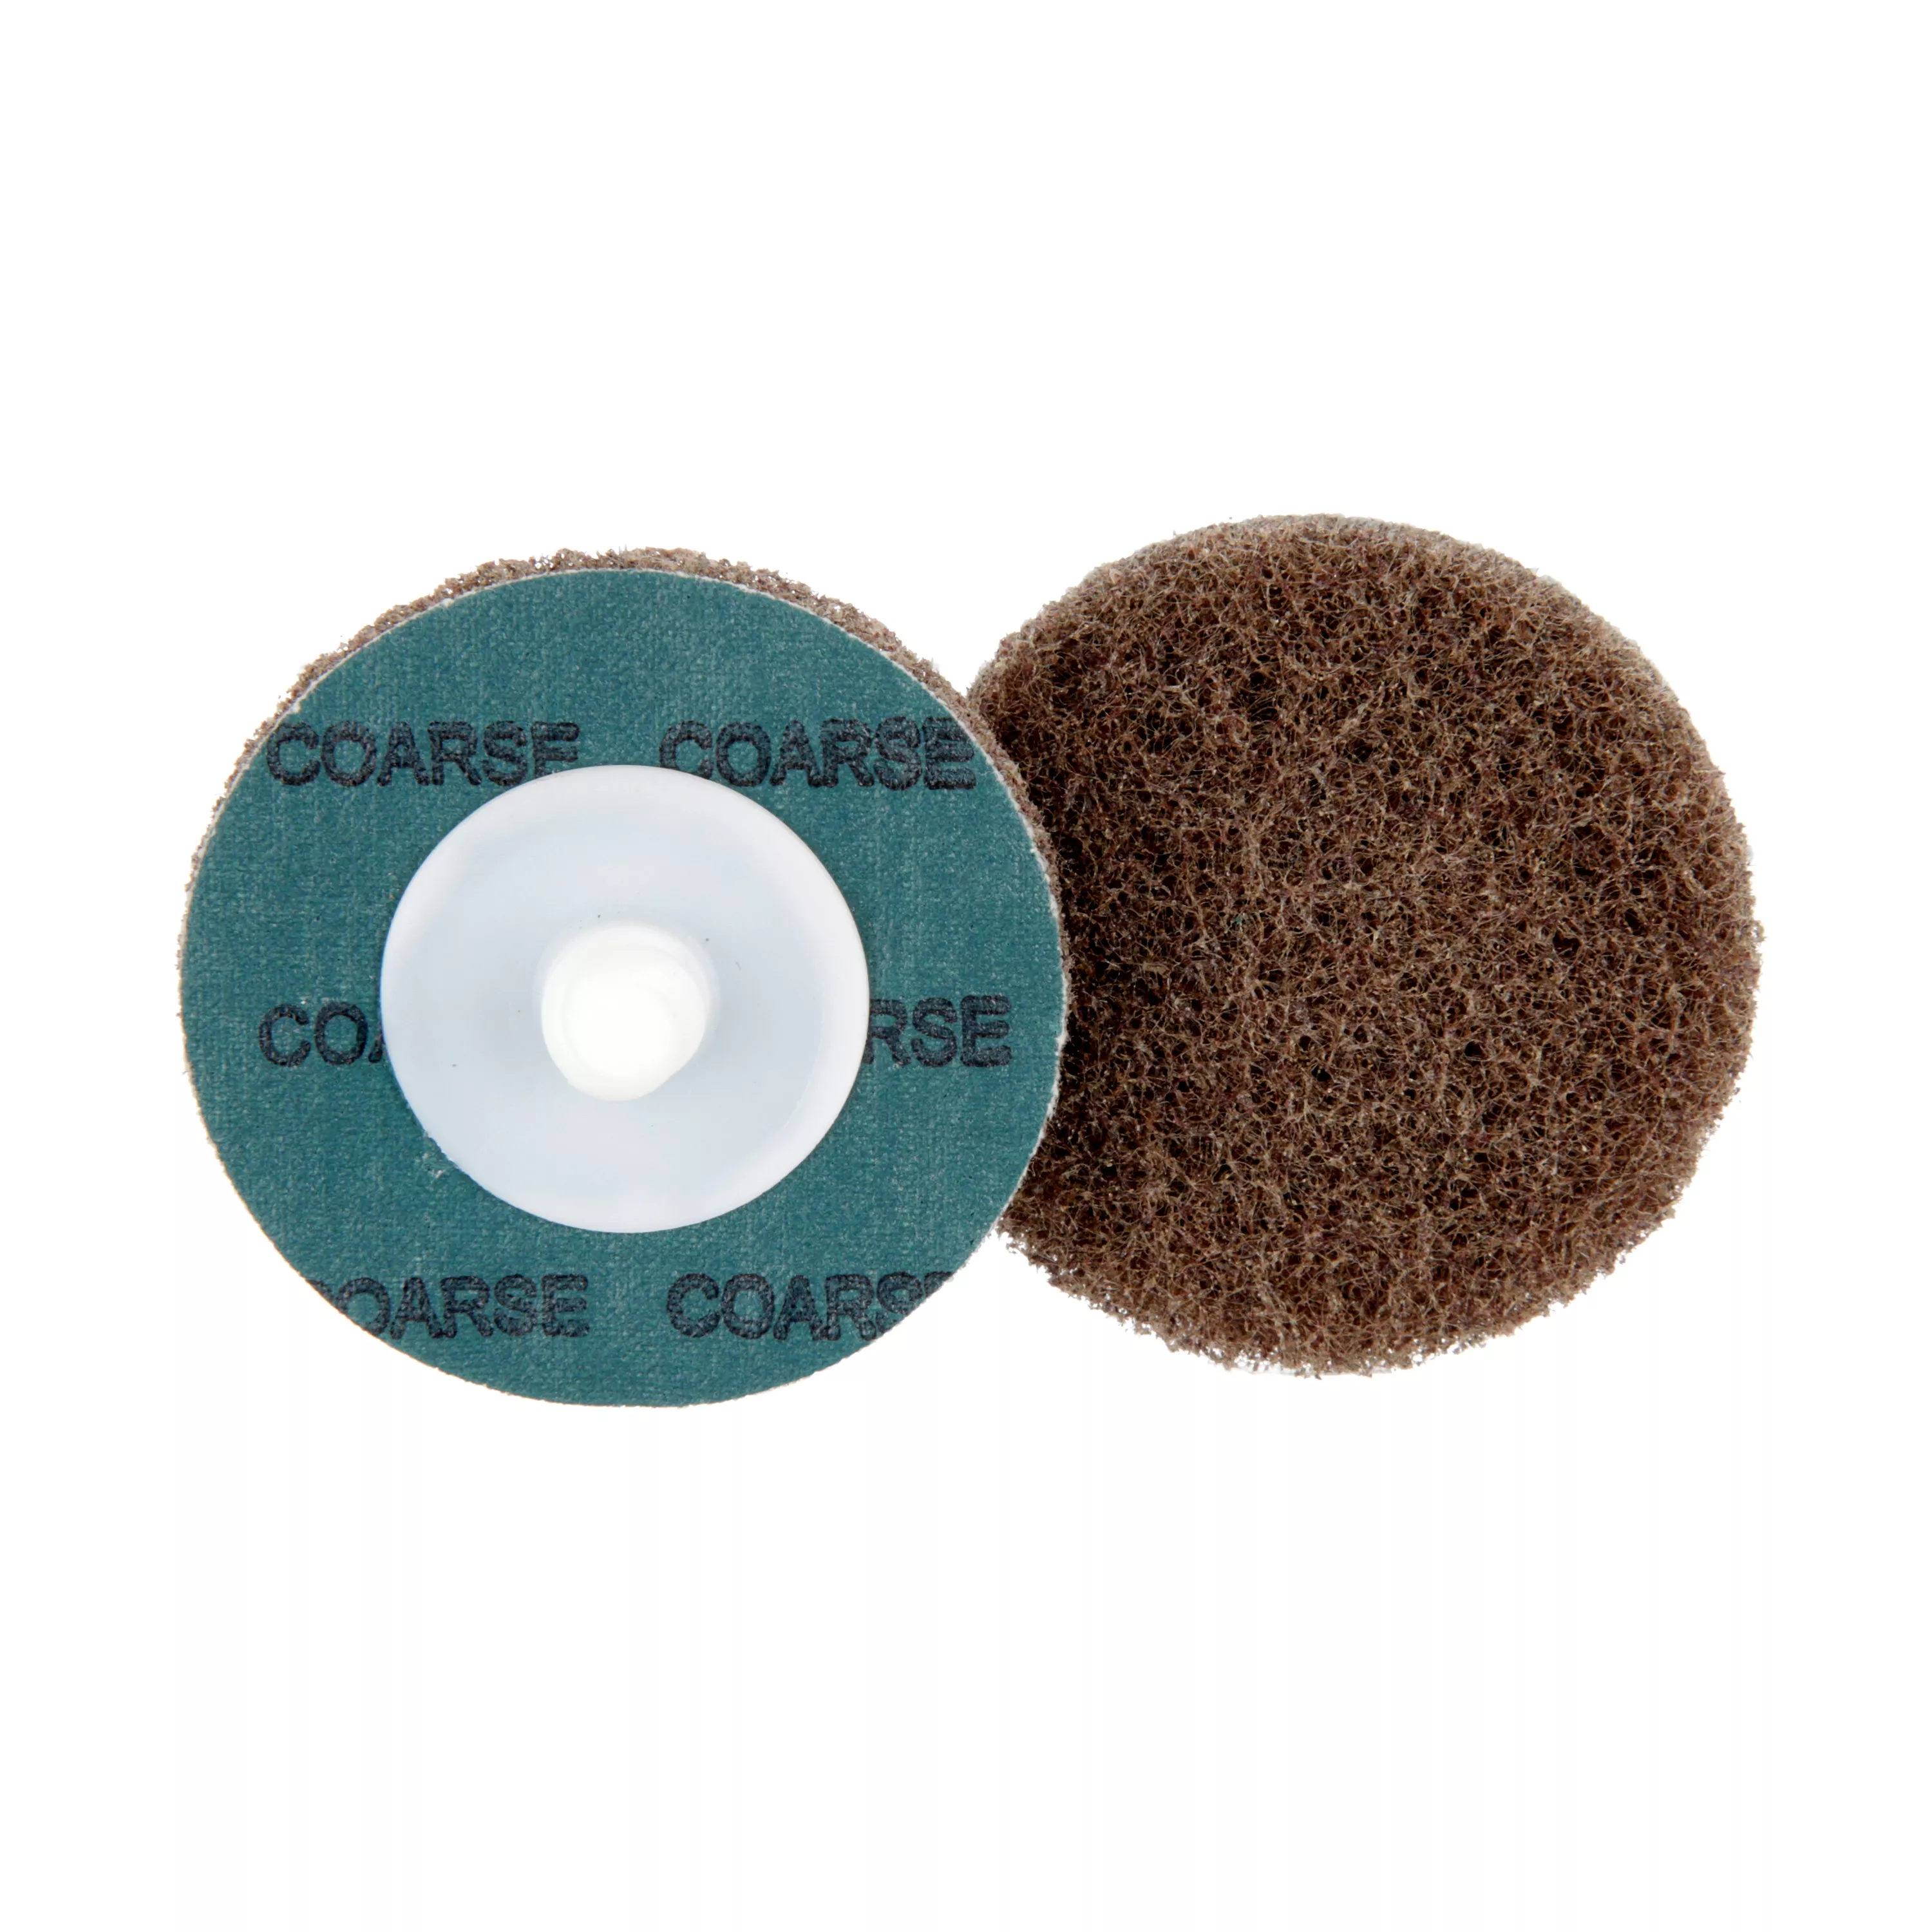 Standard Abrasives™ Quick Change Buff and Blend GP Disc, 810311, A/O
Coarse, TR, Maroon, 2 in, Die Q200P, 50/Carton, 500 ea/Case